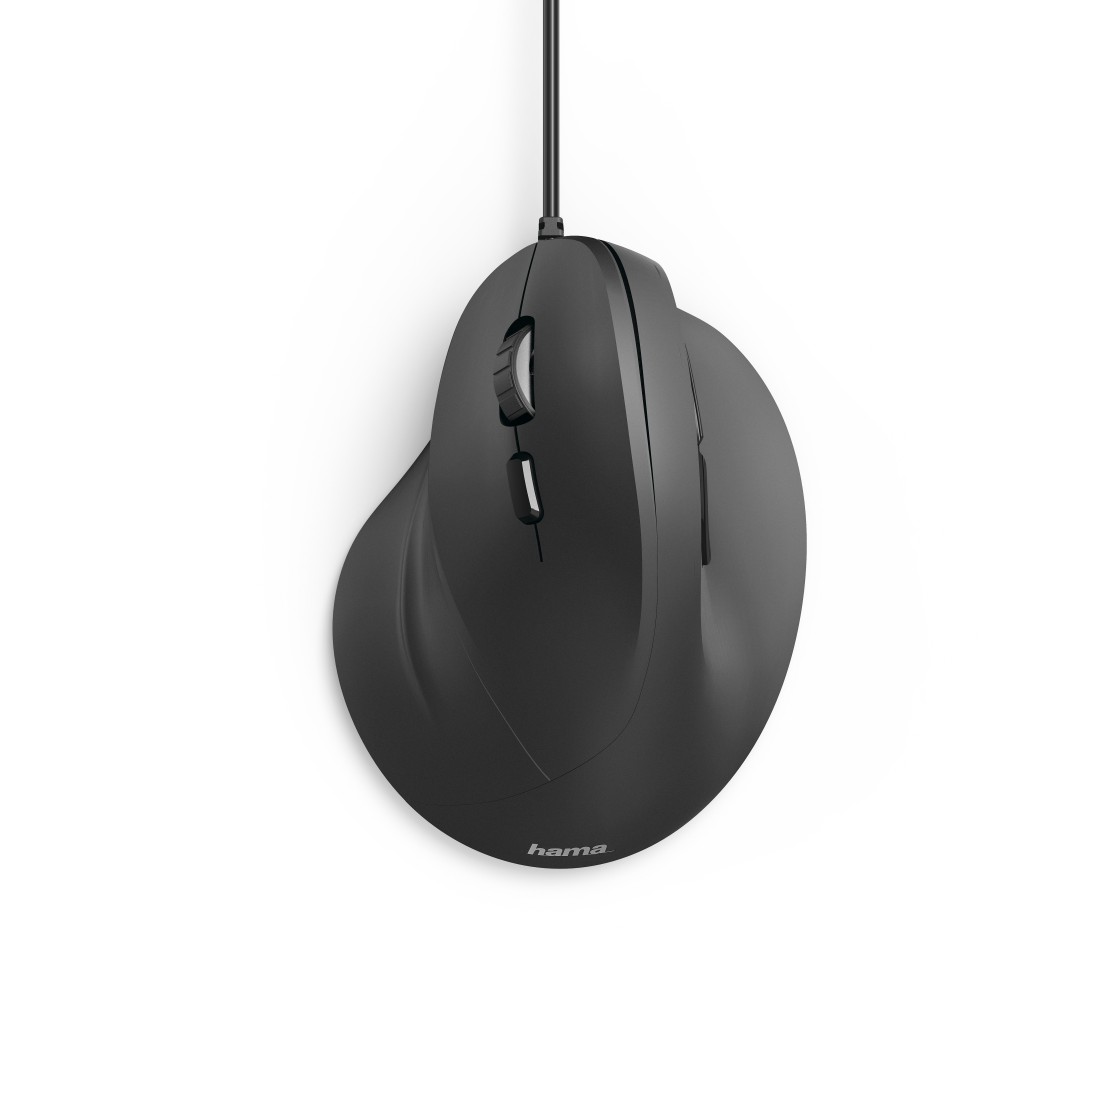 You Recently Viewed Hama Ergonomic EMC-500L Vertical Left-handed Cabled Mouse Image